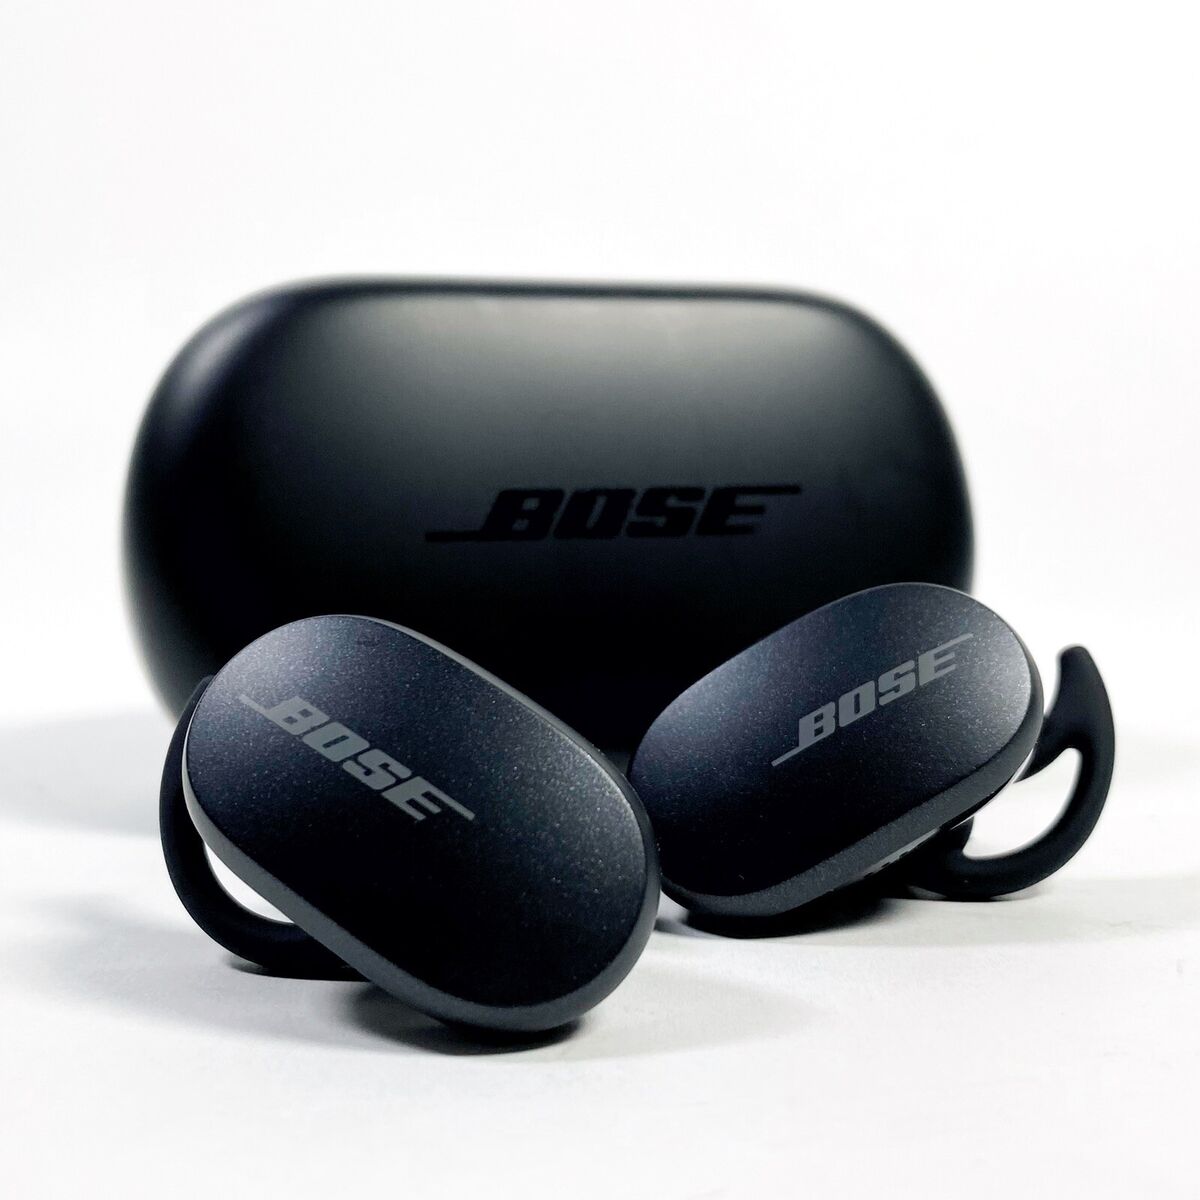 connecting-bose-wireless-earbuds-effortlessly